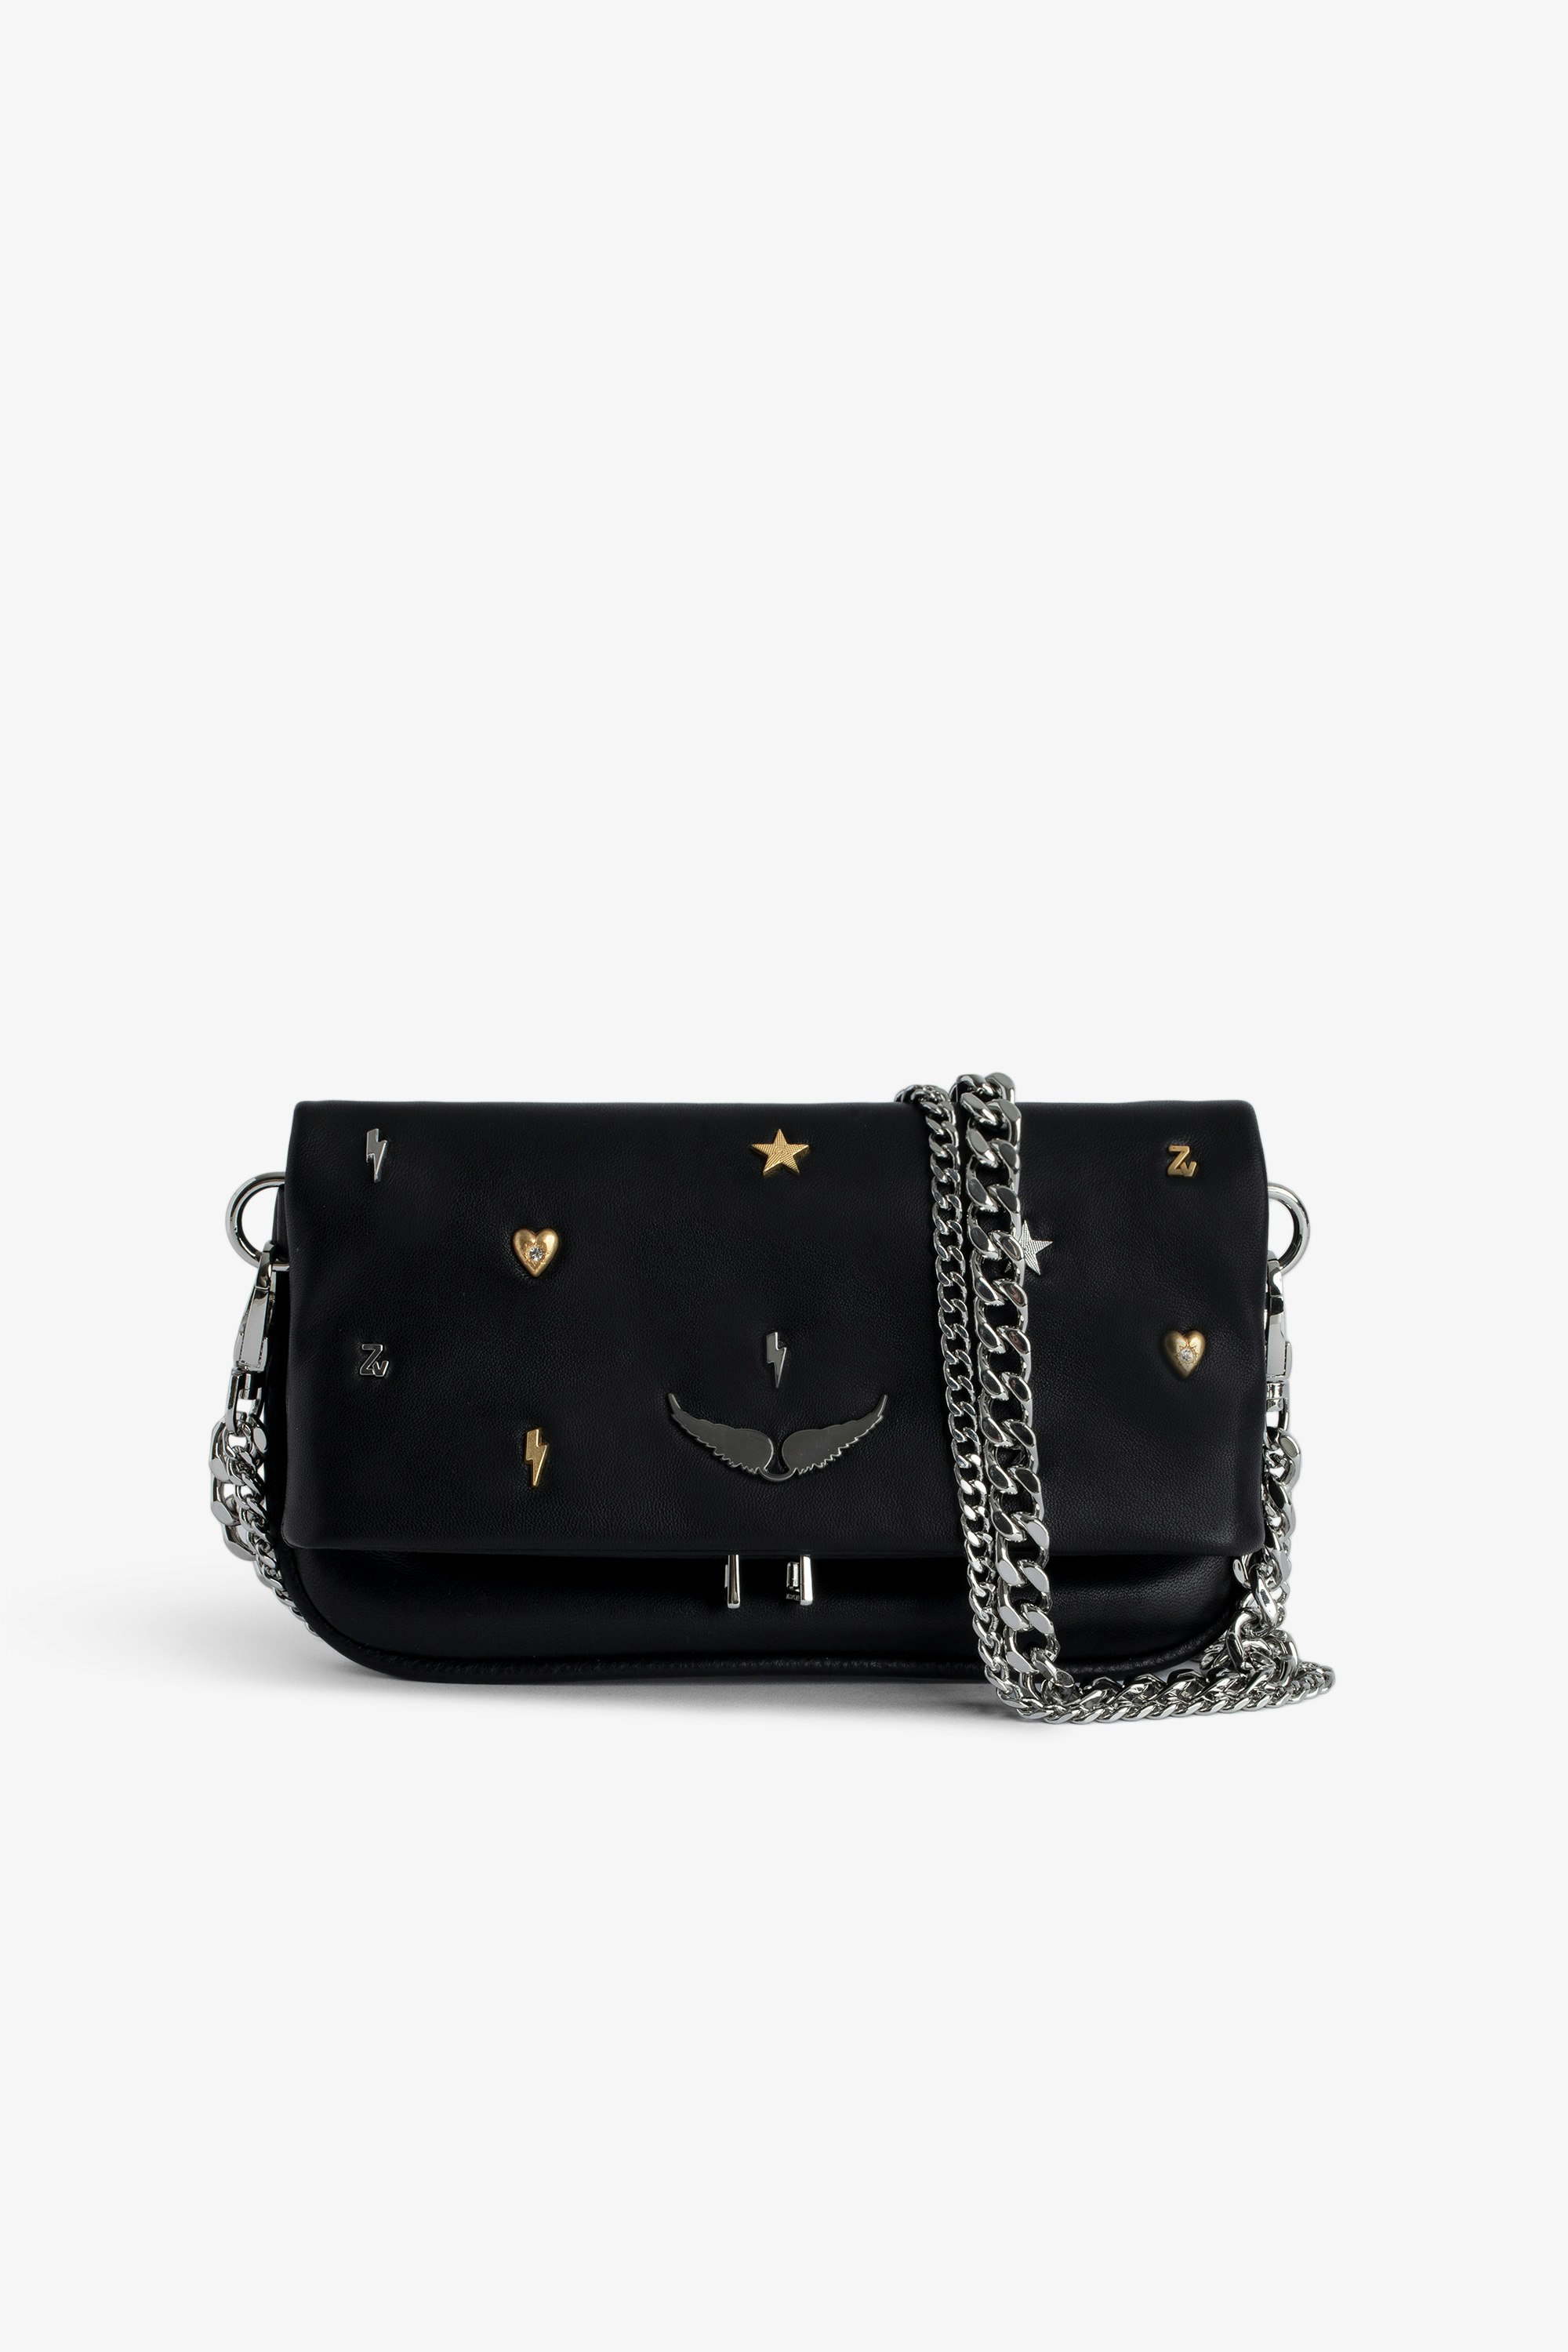 Rock Nano Lucky Charms Clutch - Small black smooth leather clutch with double chain decorated with lucky charms.